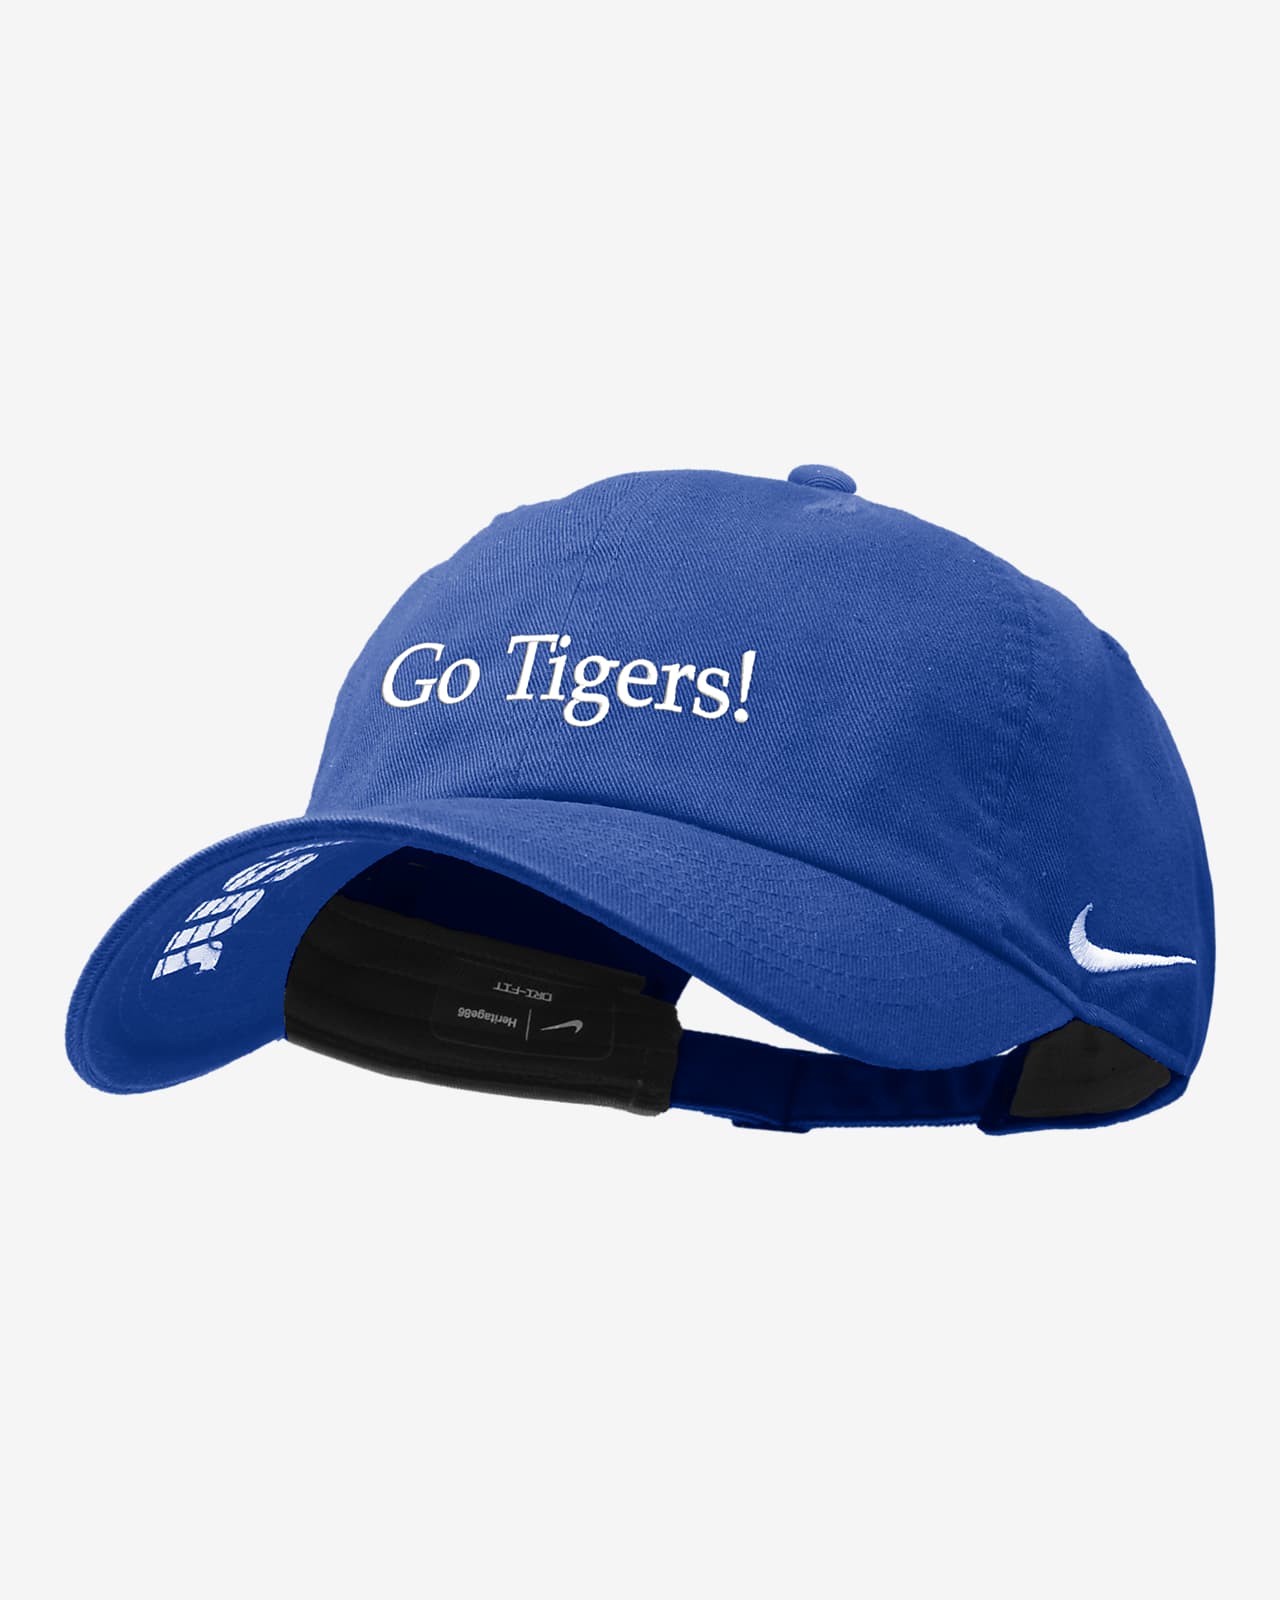 Tennessee State Nike College Adjustable Cap